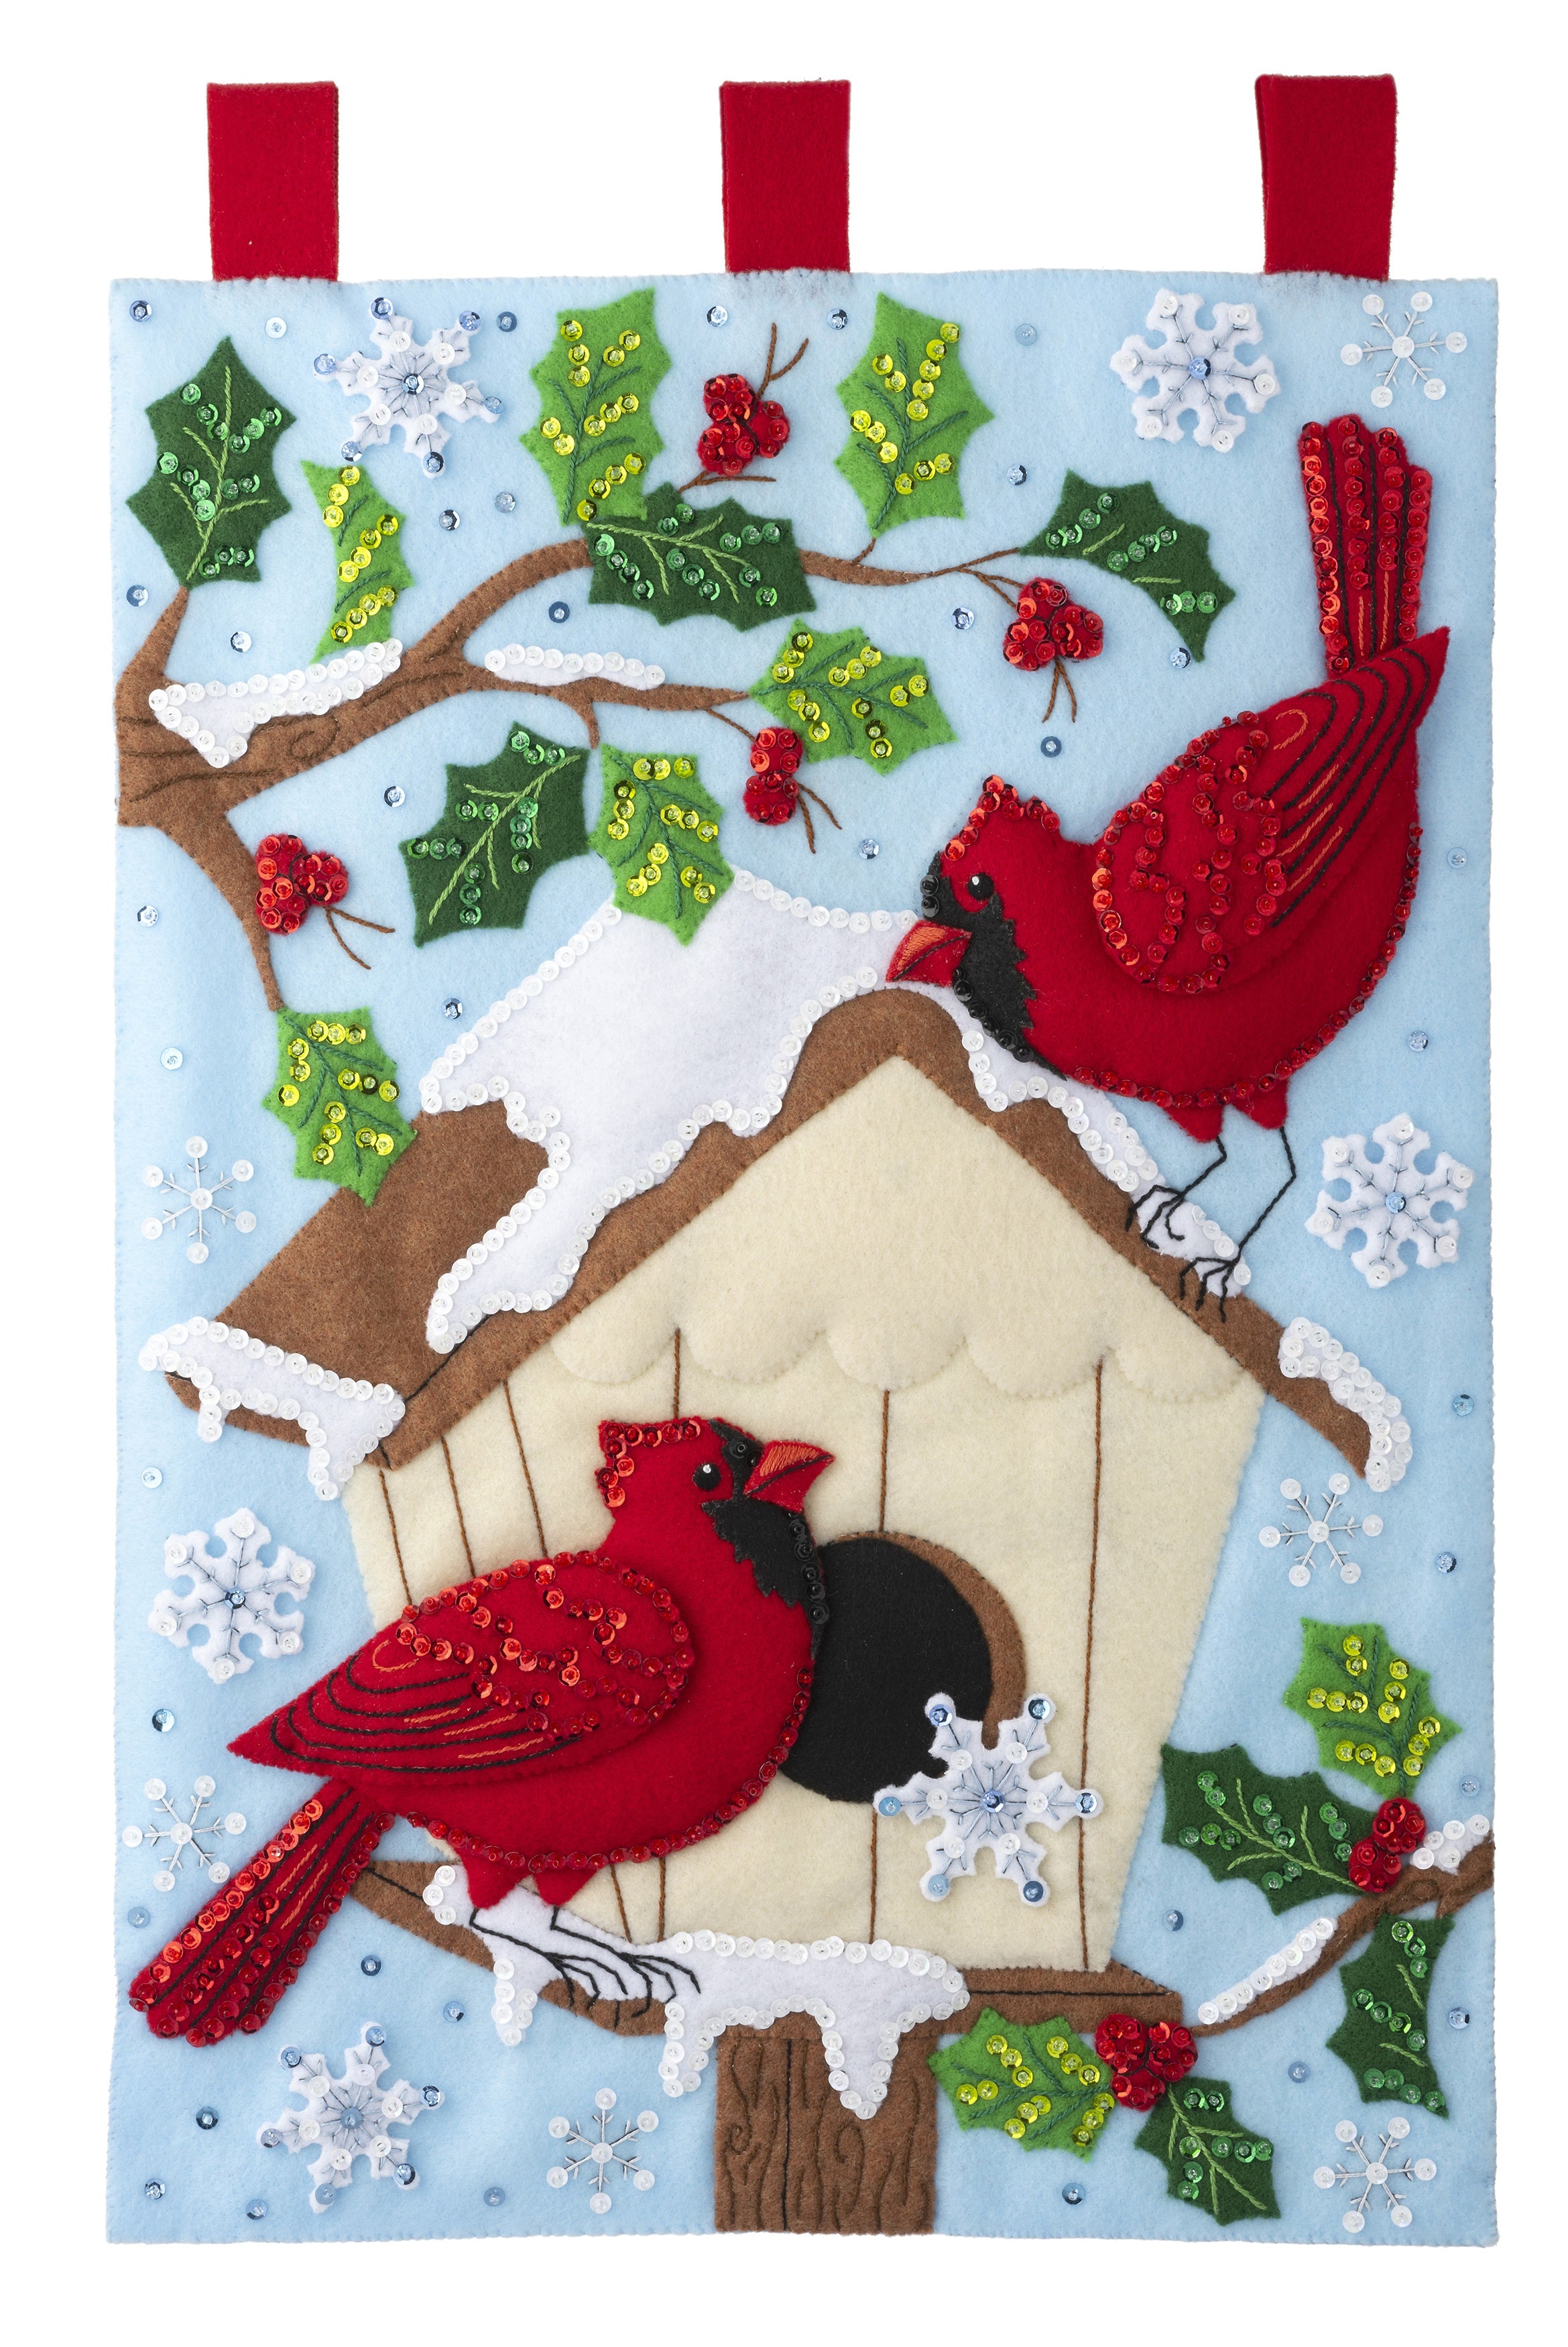 Bucilla felt wall hanging kit. Design features two cardinals and a birdhouse with trees and snow in the background.